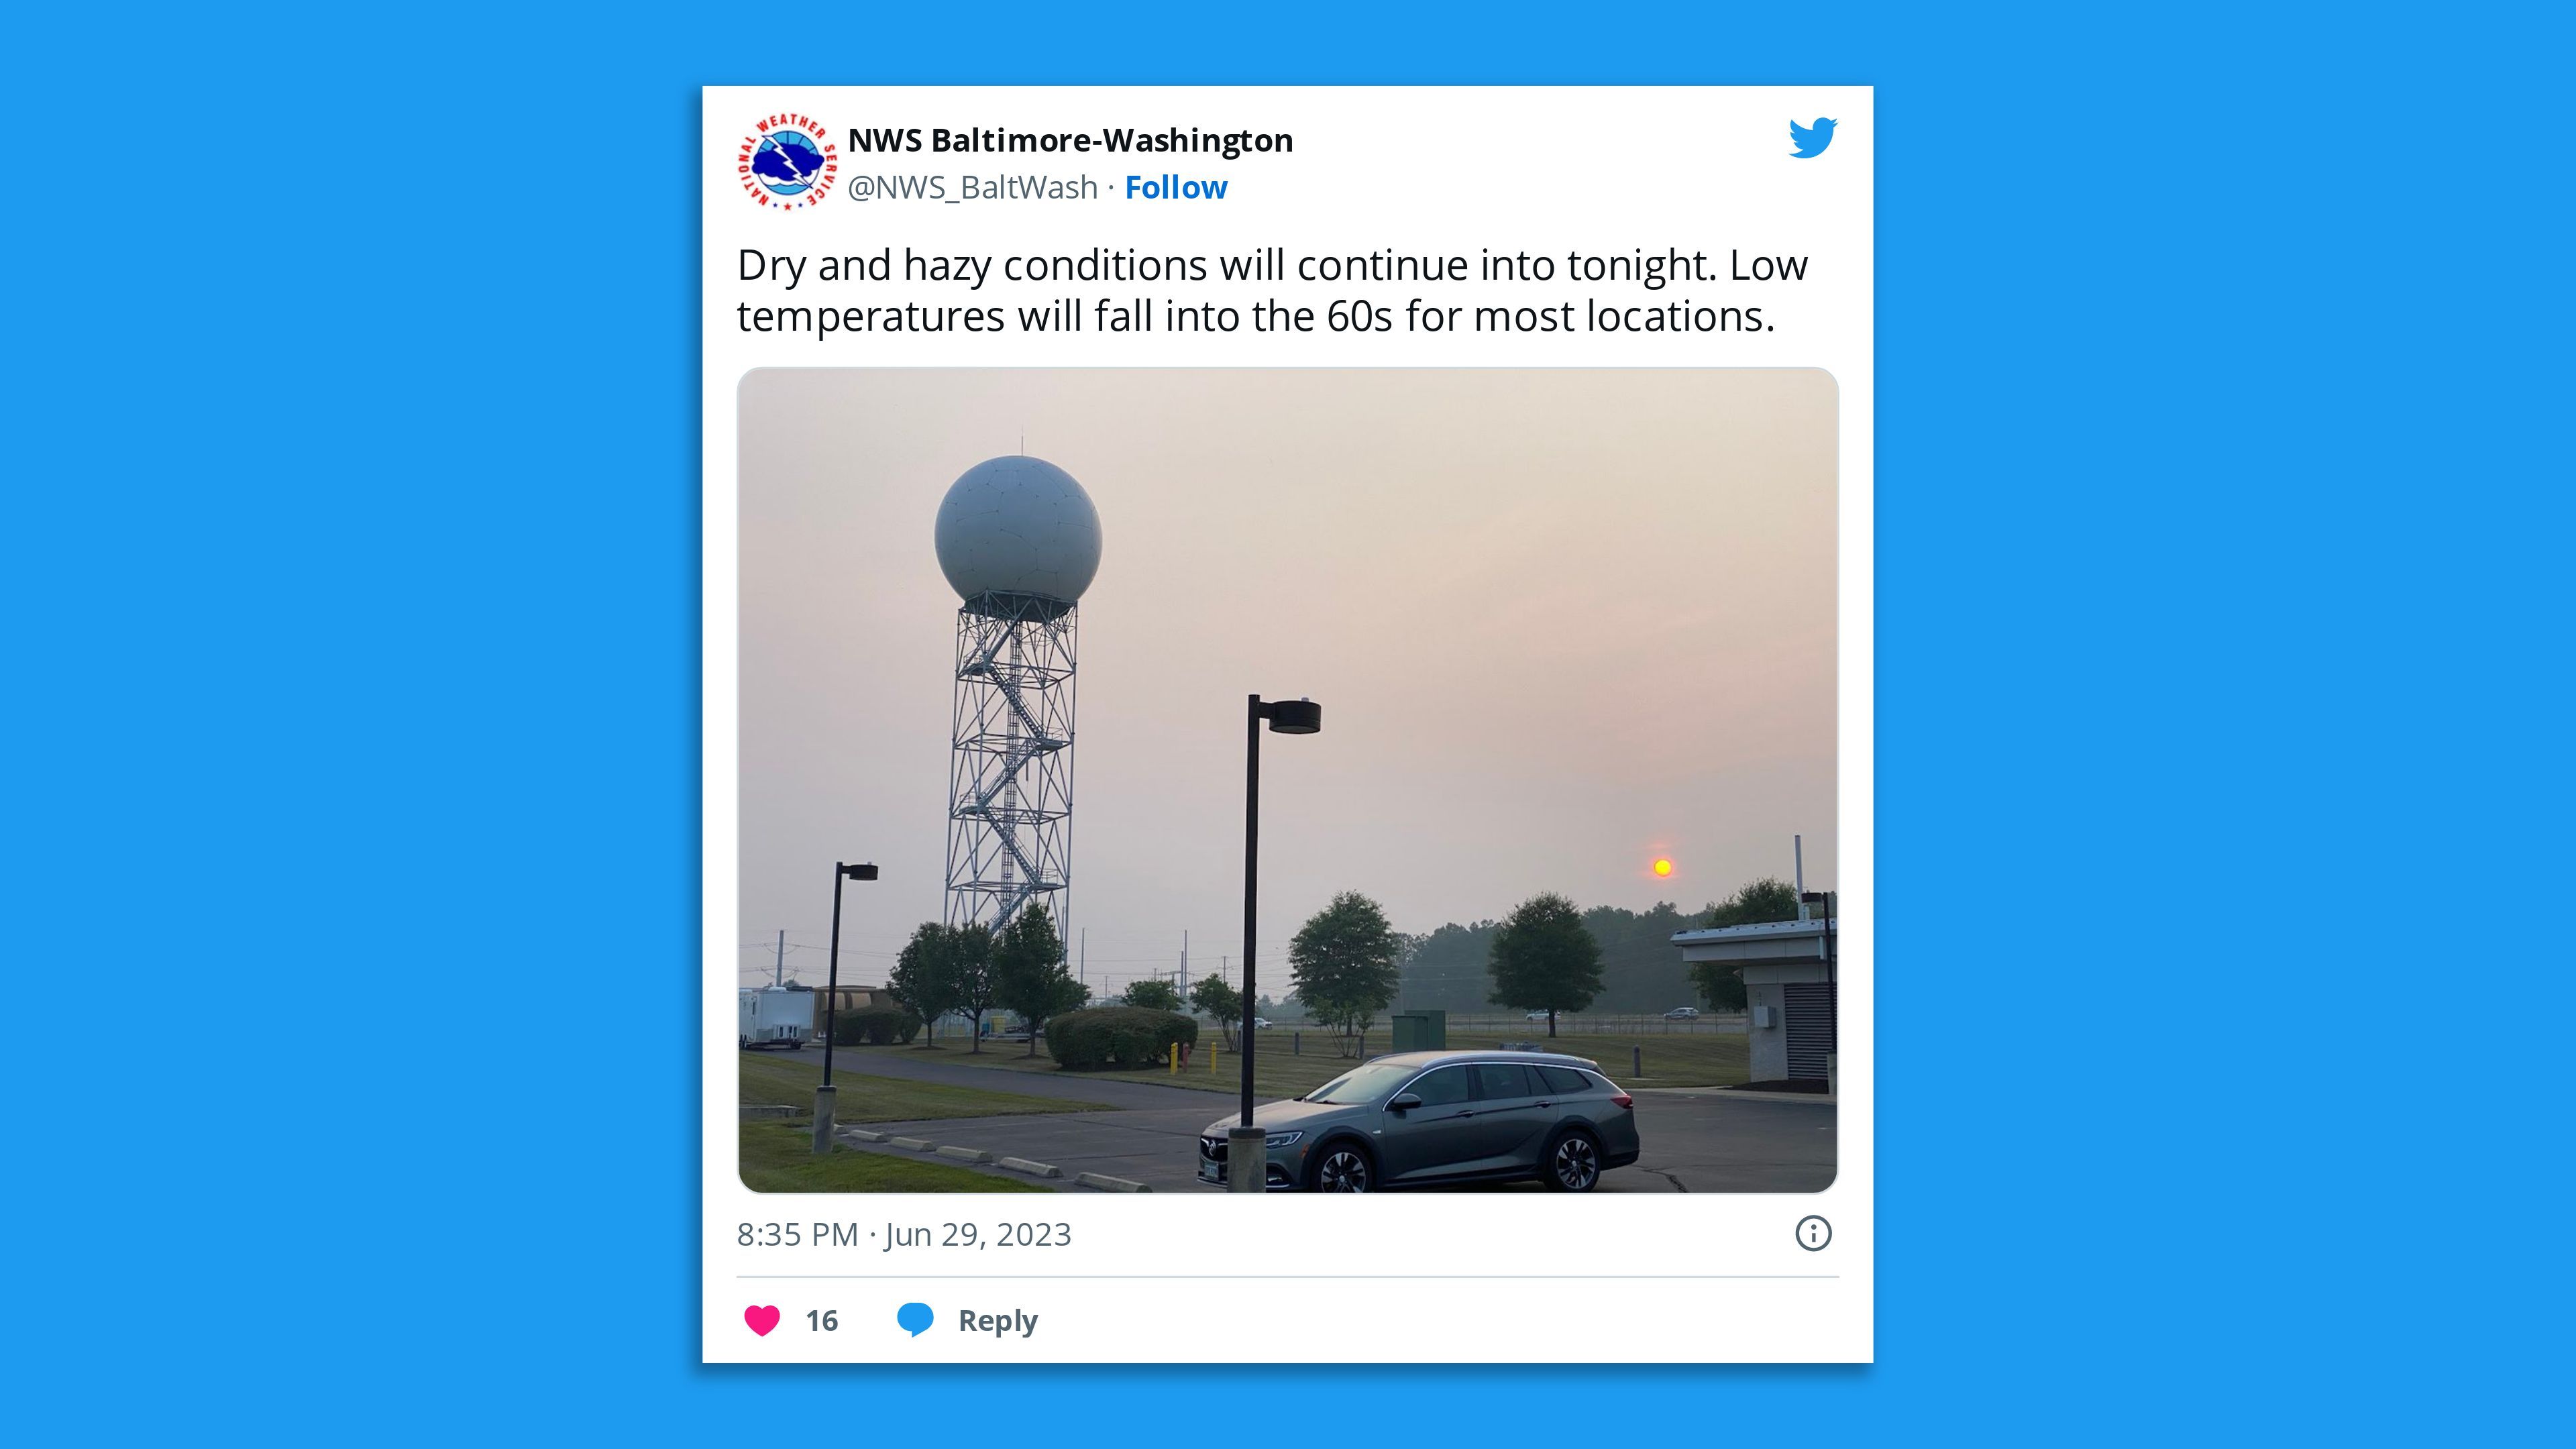 A screenshot of a tweet by NWS Baltimore-Washington saying: "Dry and hazy conditions will continue into tonight. Low temperatures will fall into the 60s for most locations."